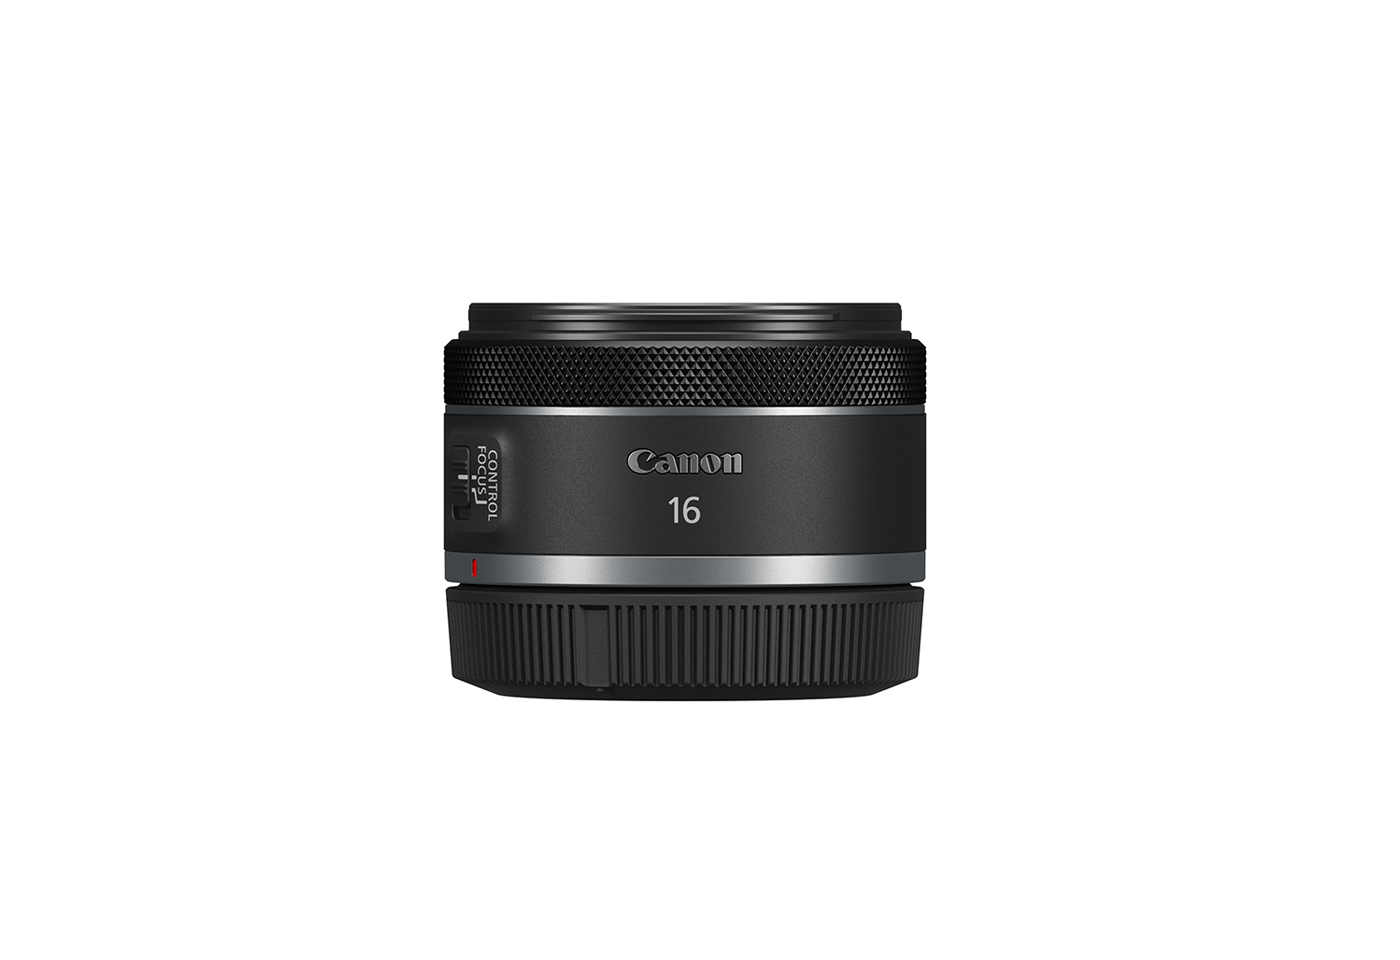 Side profile image of the RF 16mm F2.8 STM wide angle lens